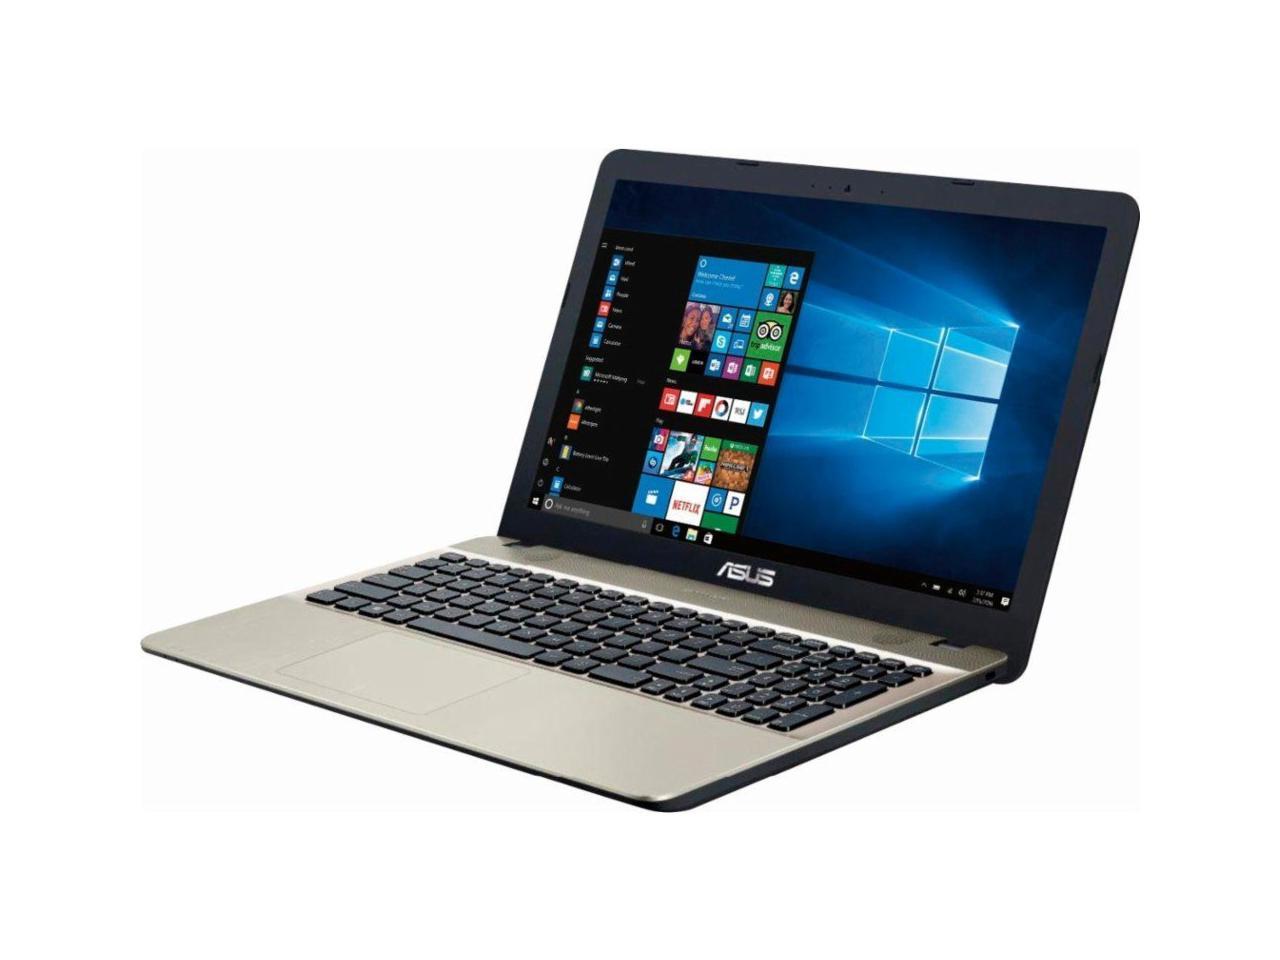 2018 Asus VivoBook Max 15.6 inch HD Flagship High Performance Laptop PC